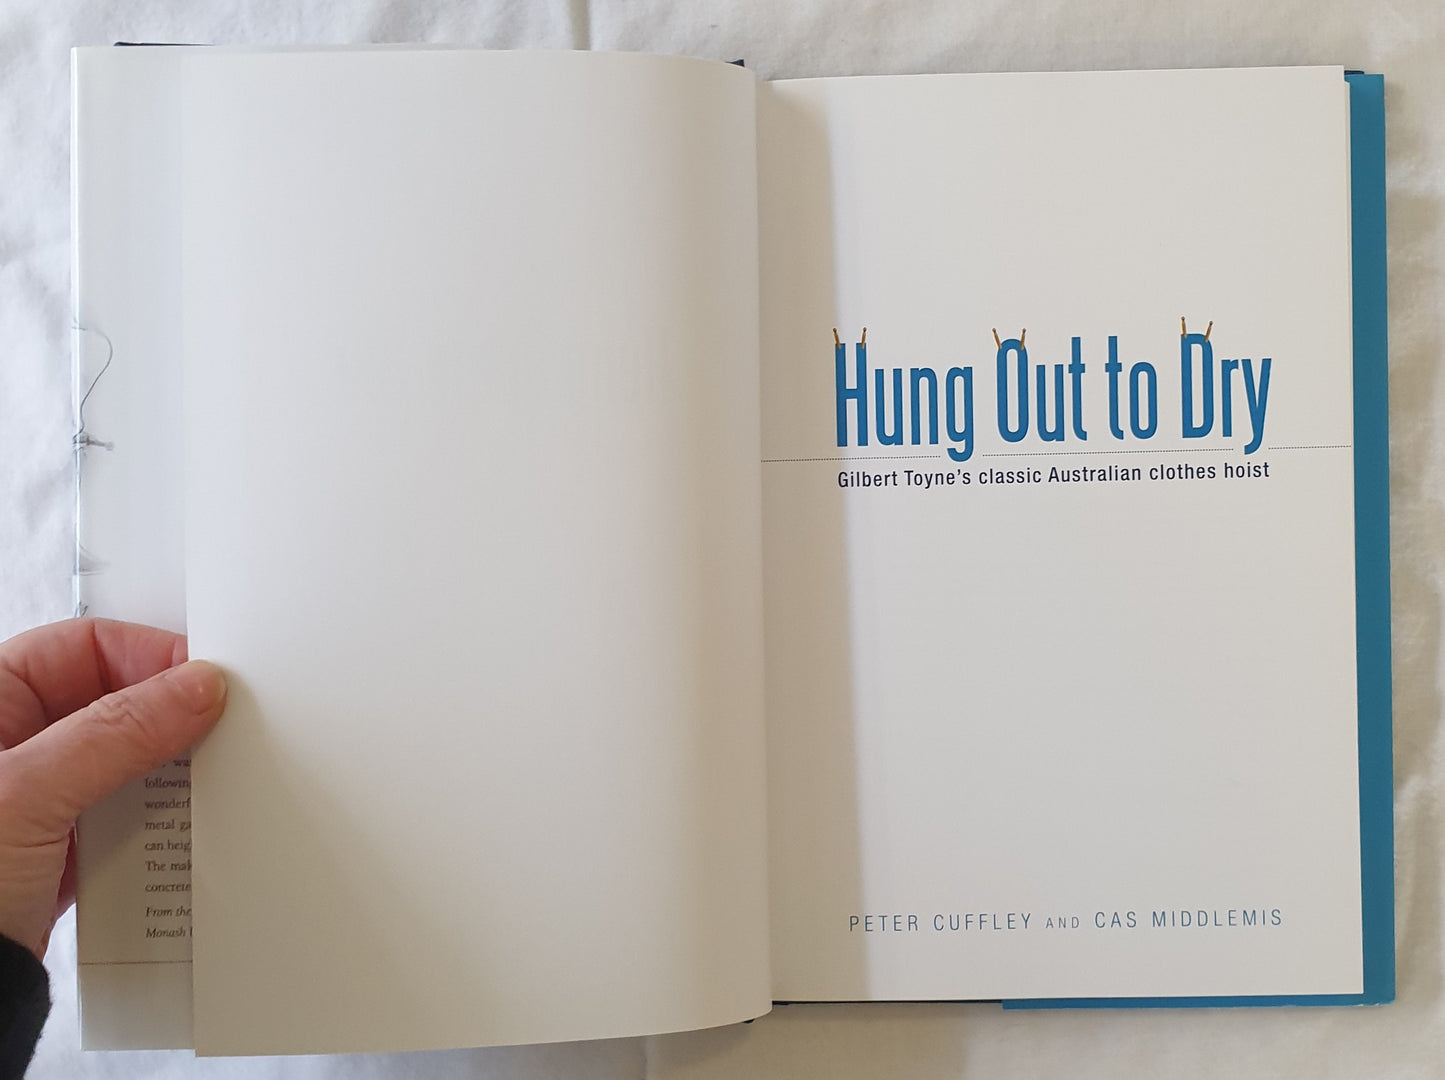 Hung Out To Dry by Peter Cuffley and Cas Middlemis